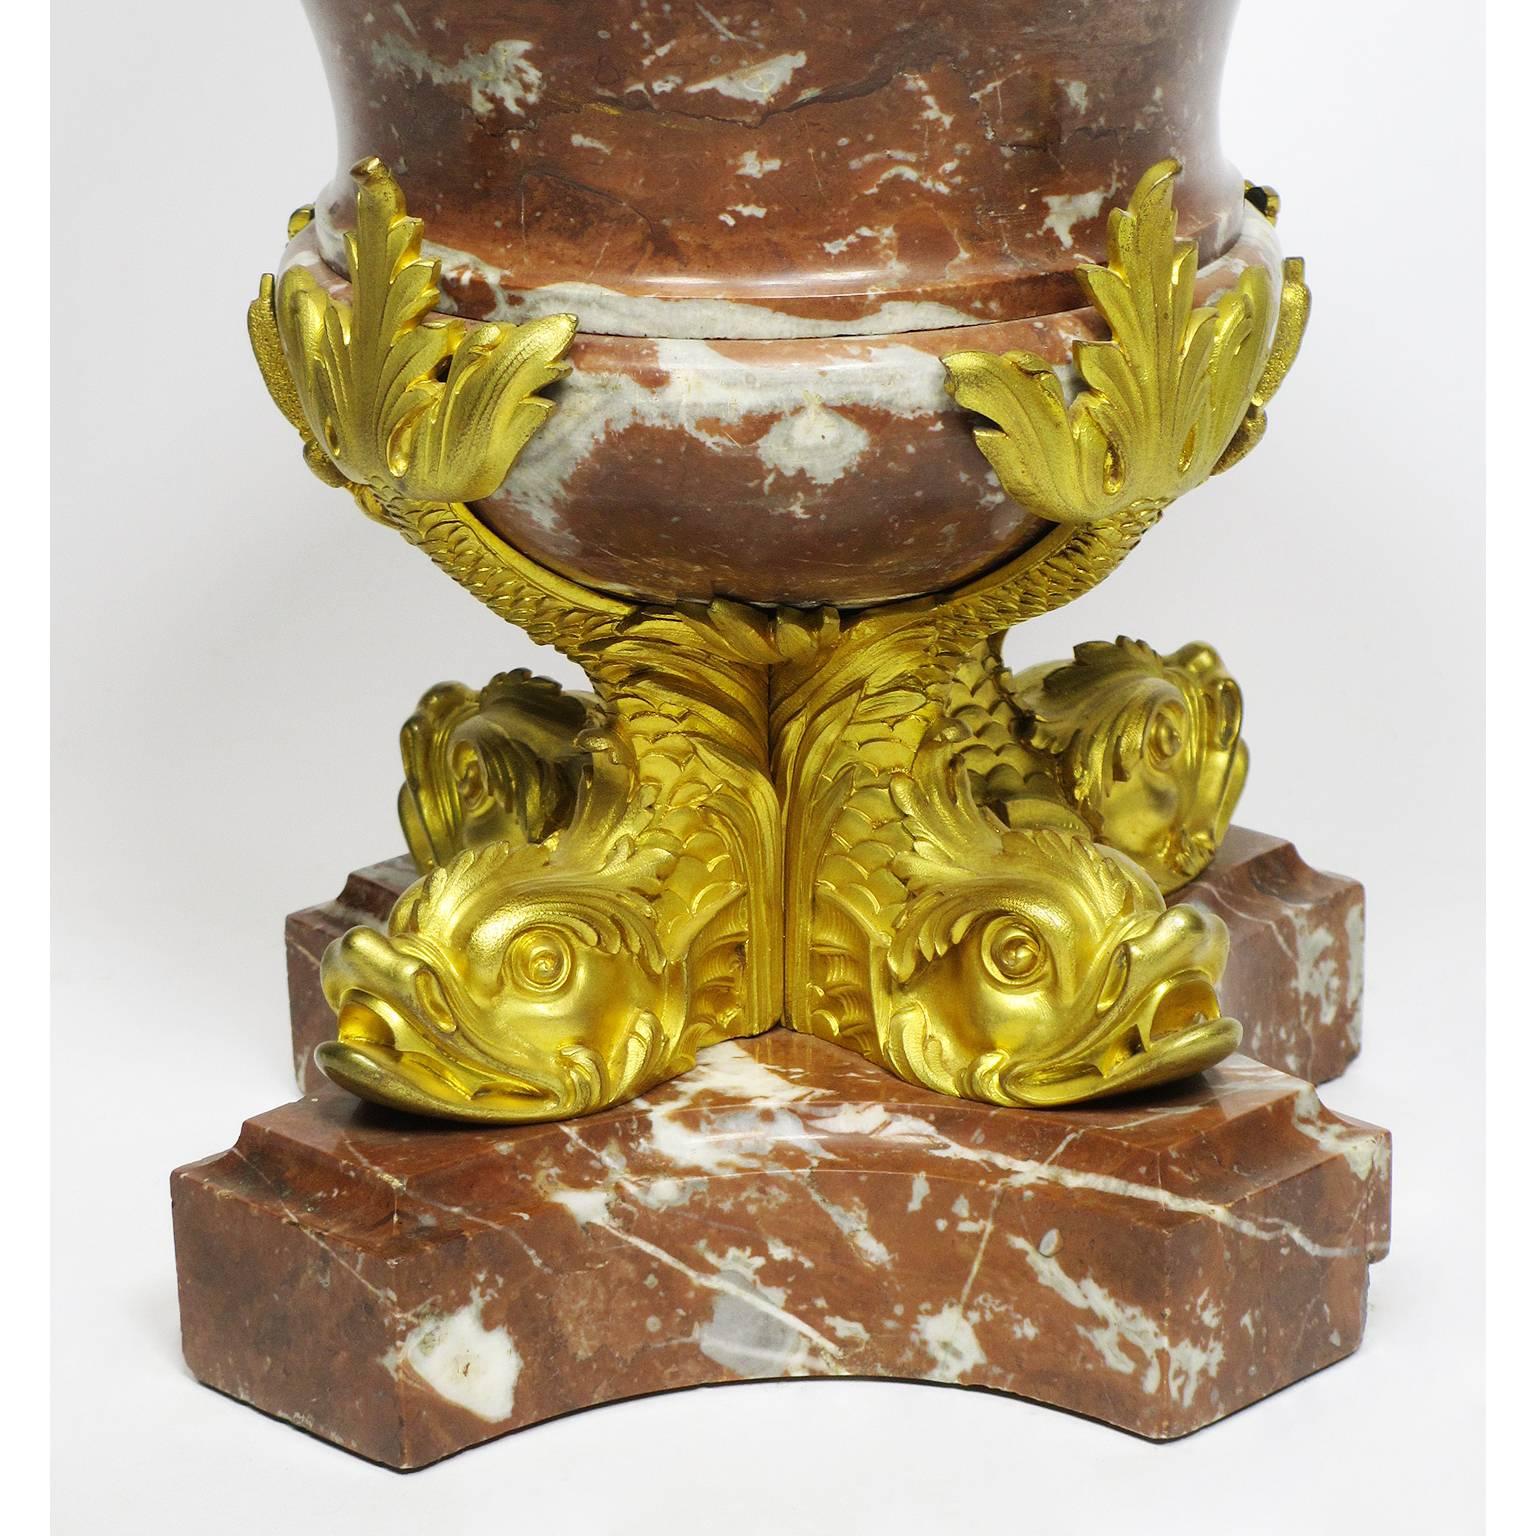 Fine Pair of French 19th Century Marble and Gilt Bronze-Mounted Flambeaux Urns For Sale 1